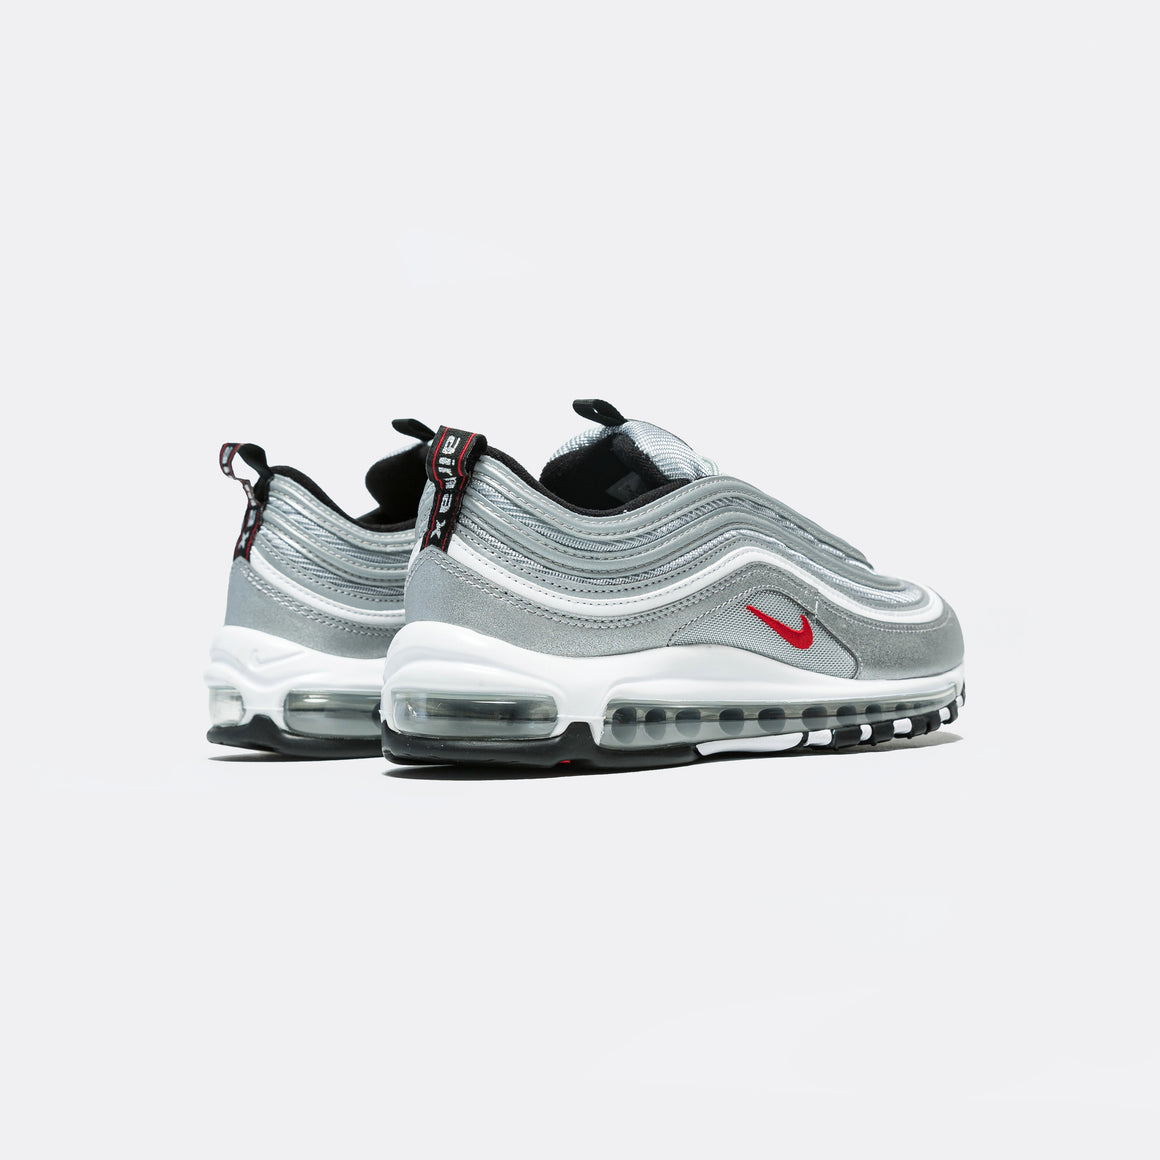 red white and silver air max 97